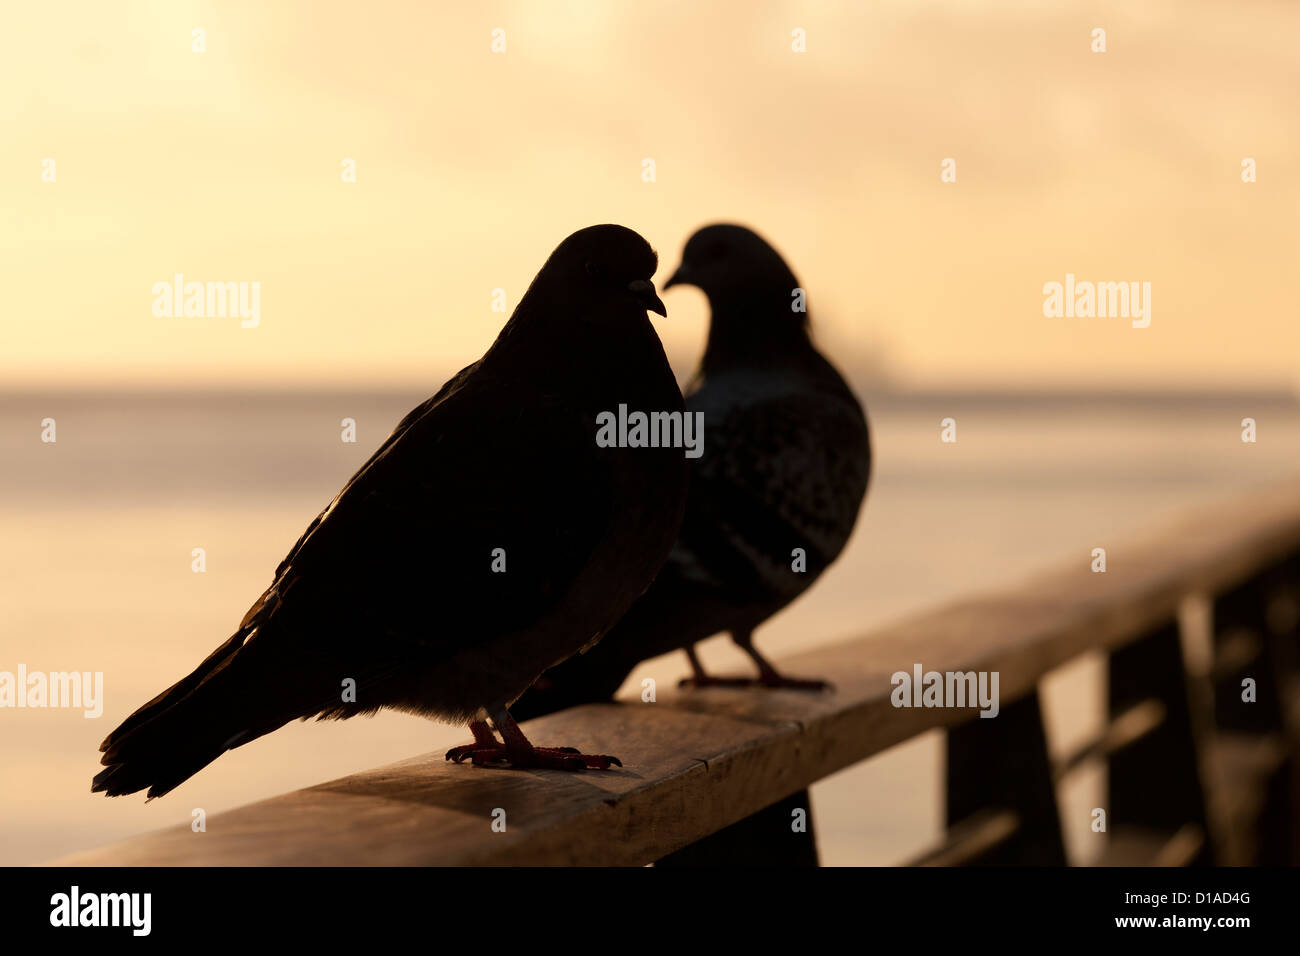 Two pigeons silhouette Stock Photo